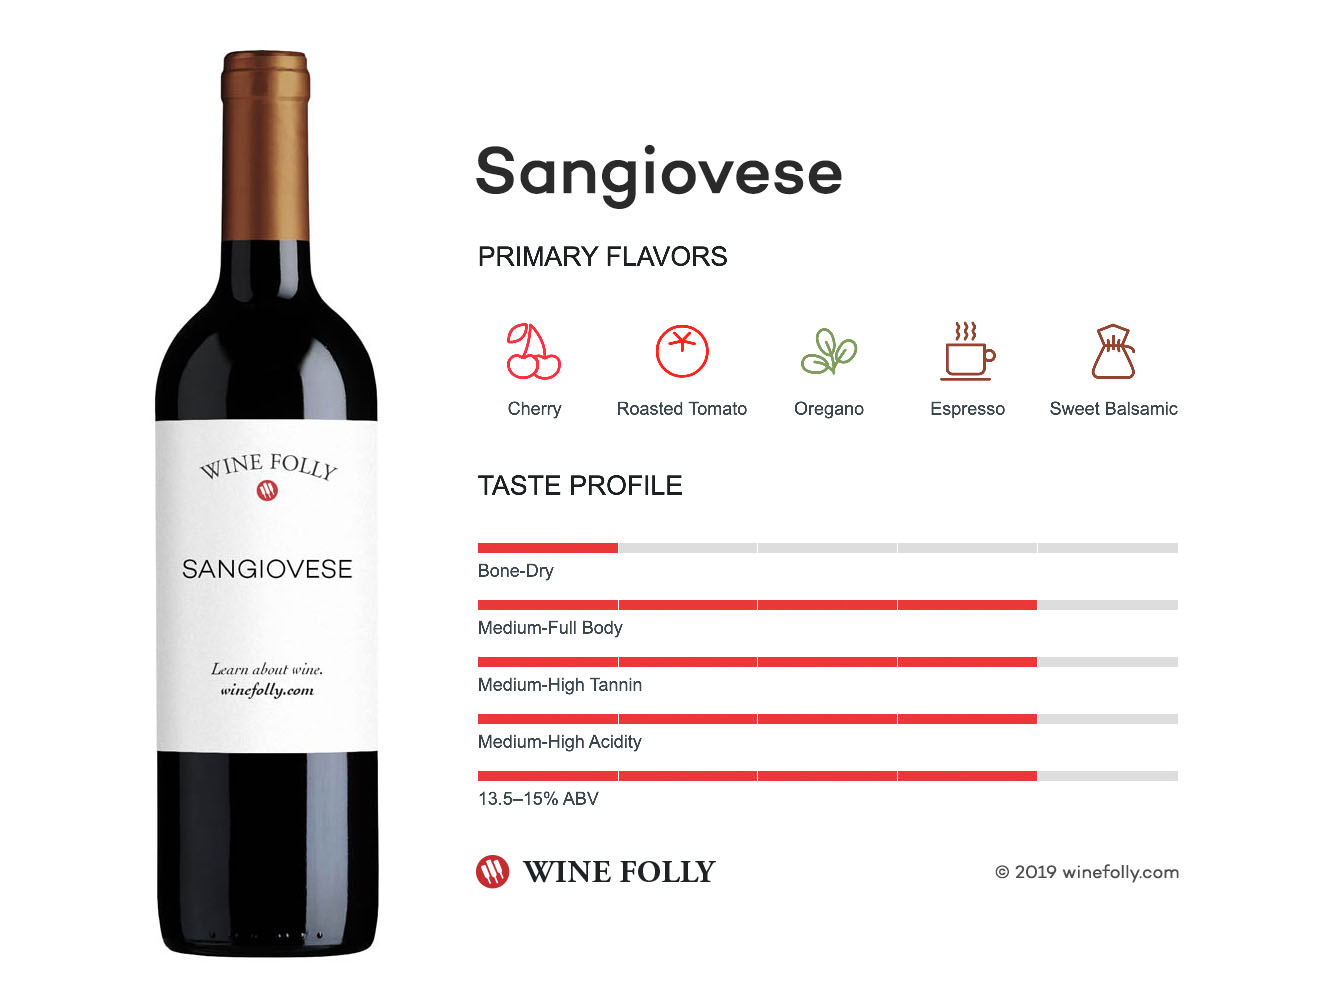 Sangiovese wine taste profile - infographic by Wine Folly